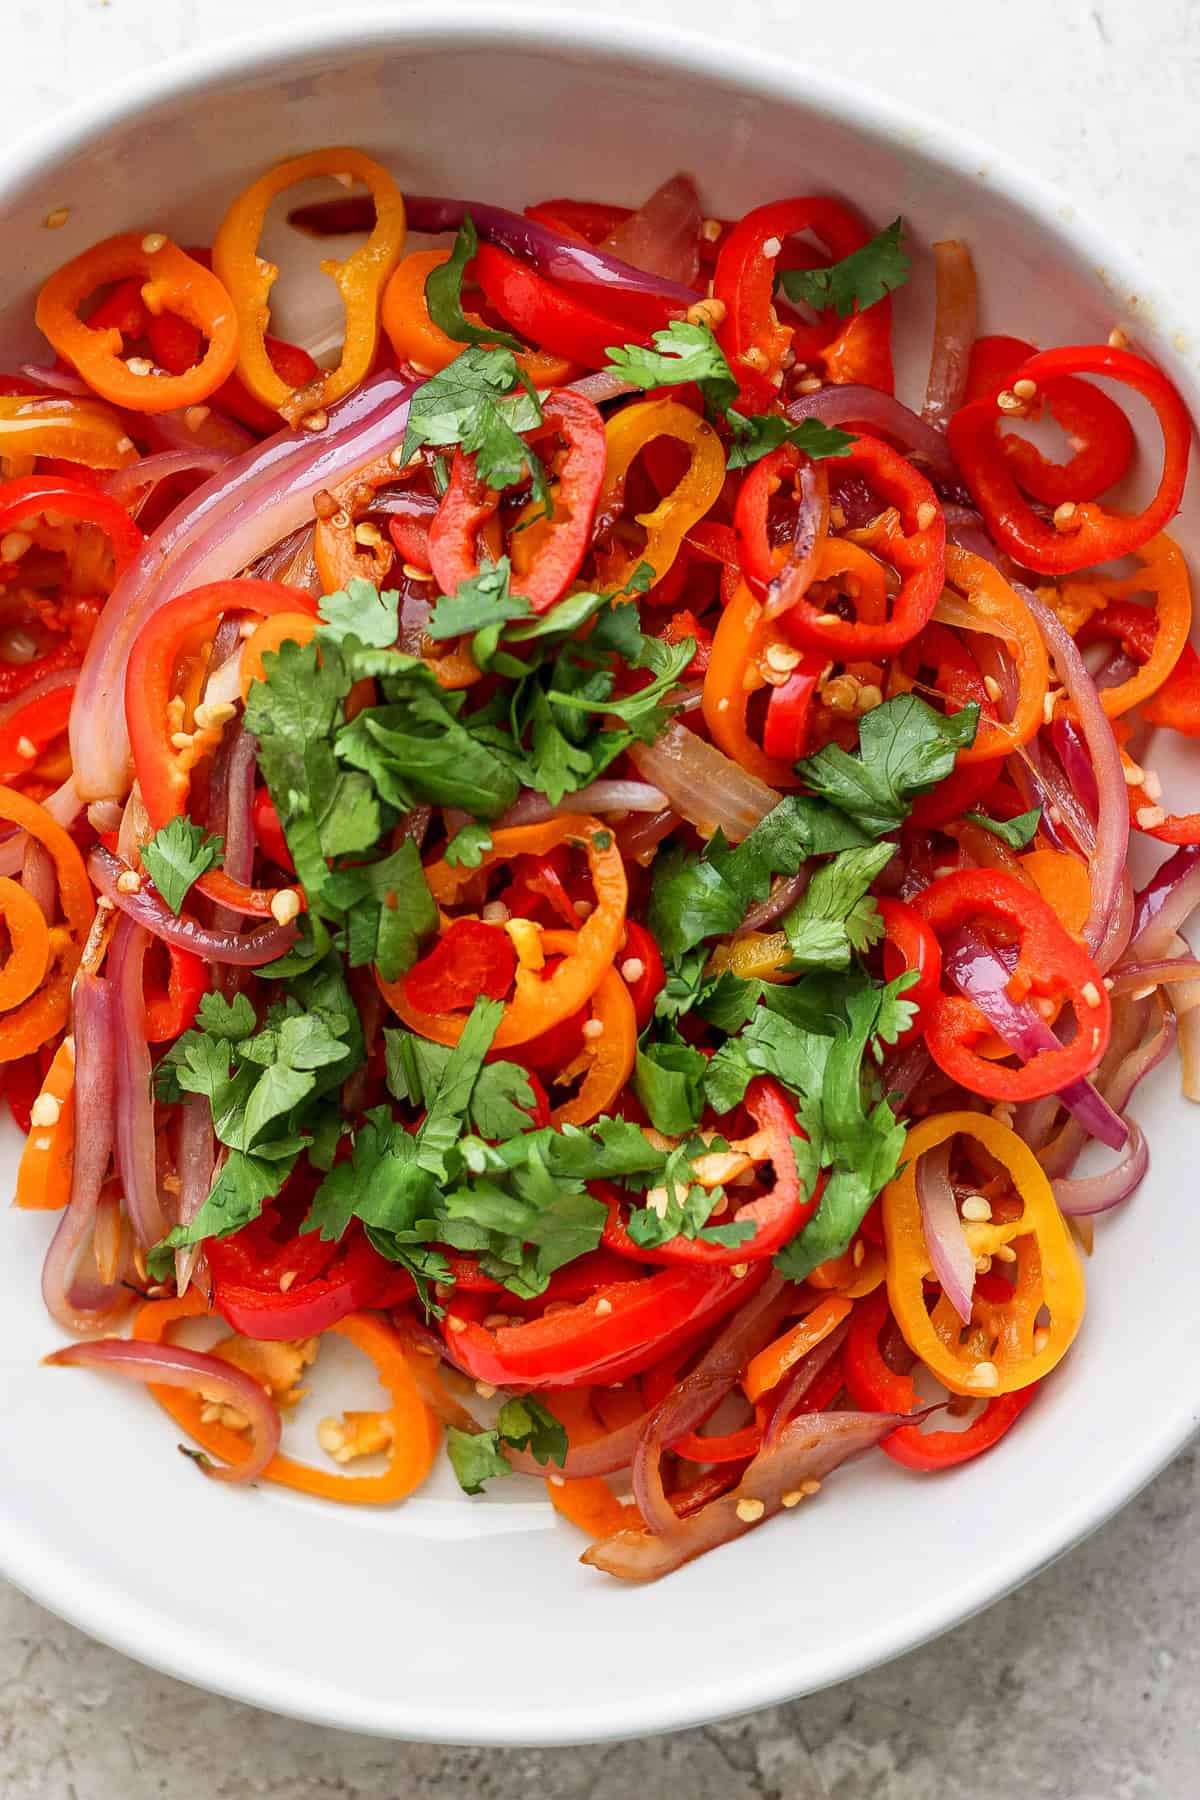 A bowl of sliced red onions, red and orange bell peppers, garnished with fresh cilantro.